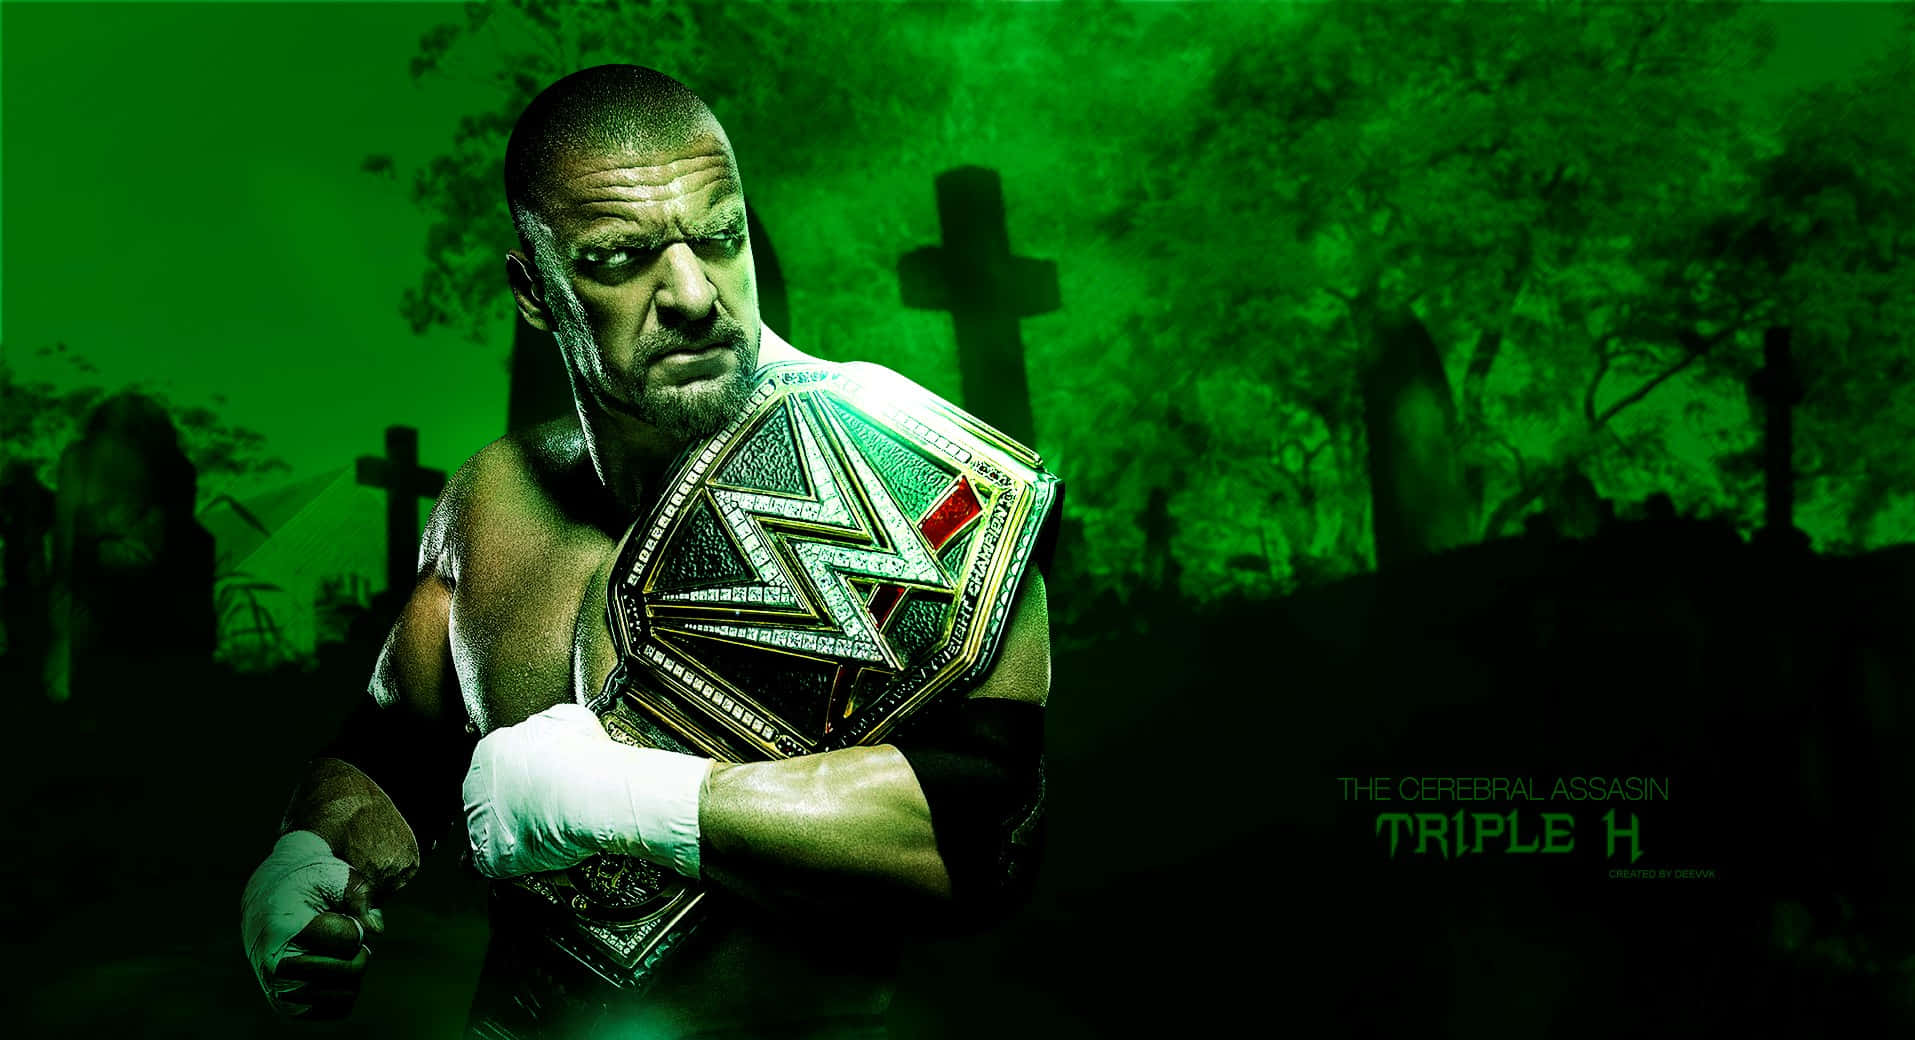 Triple H On Green Cemetery Graphic Background